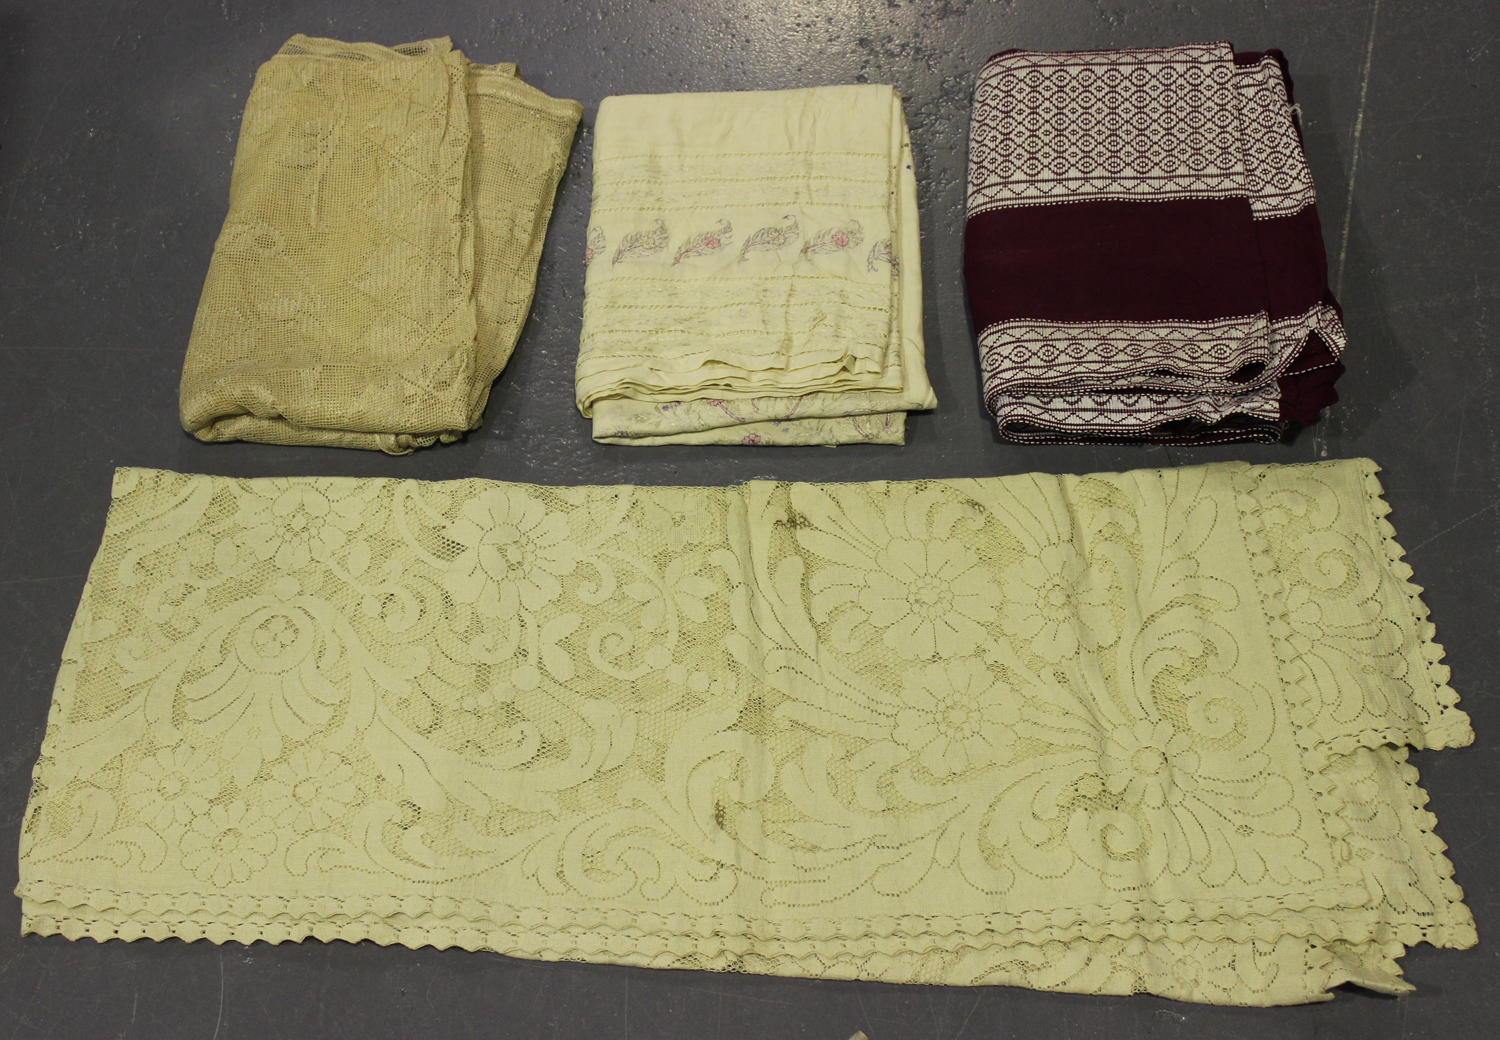 A collection of early/mid-20th century table and bed linen, including embroidered tablecloths, woven